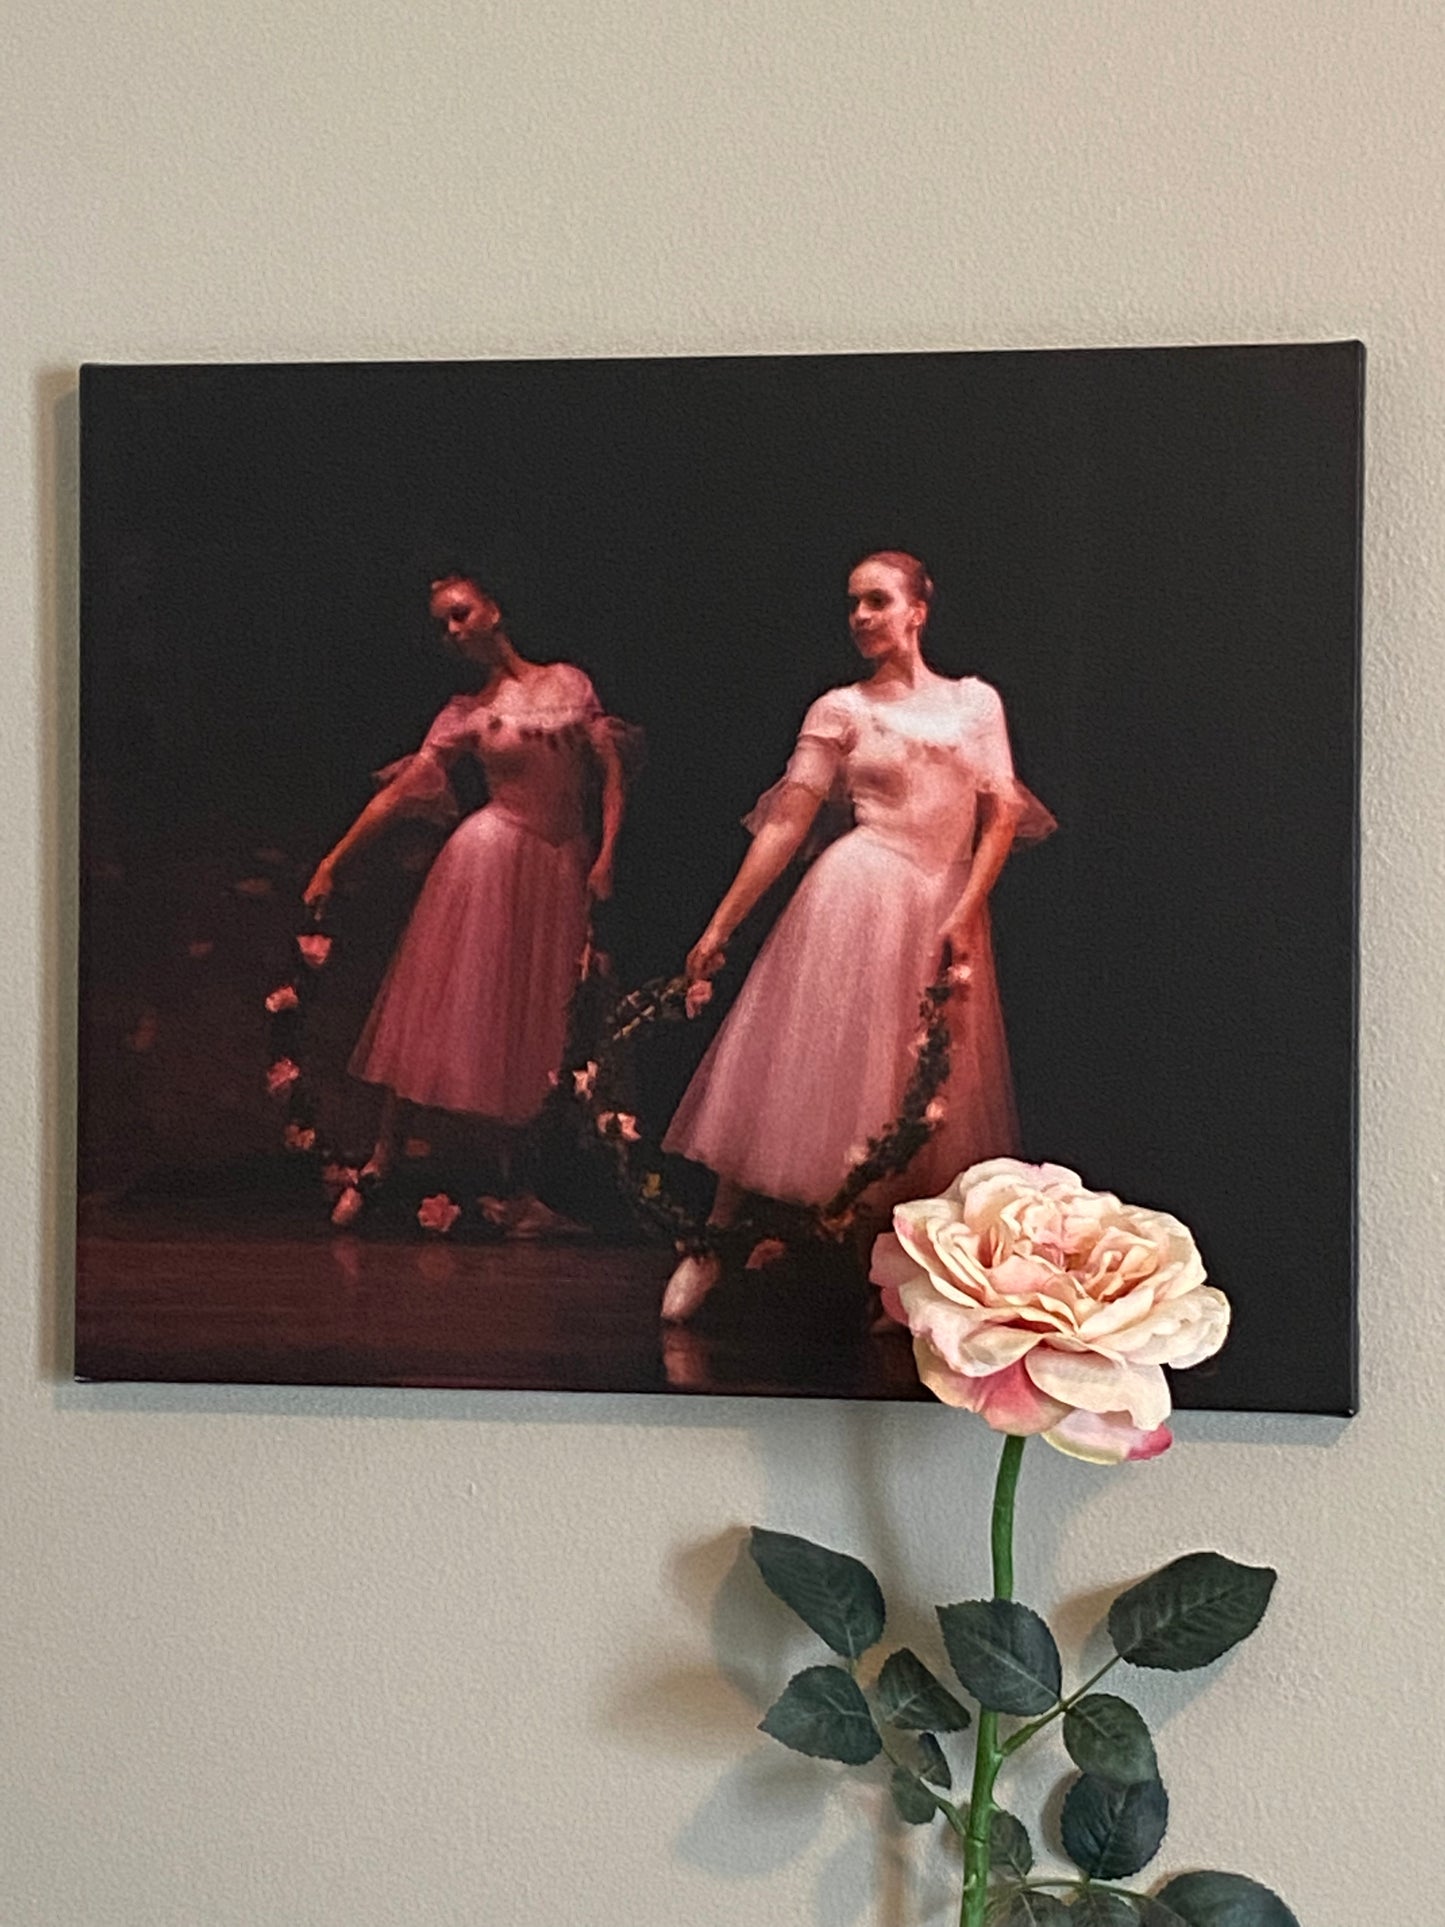 painting hanging on a wall of ballerinas in pink with pink rose wreaths